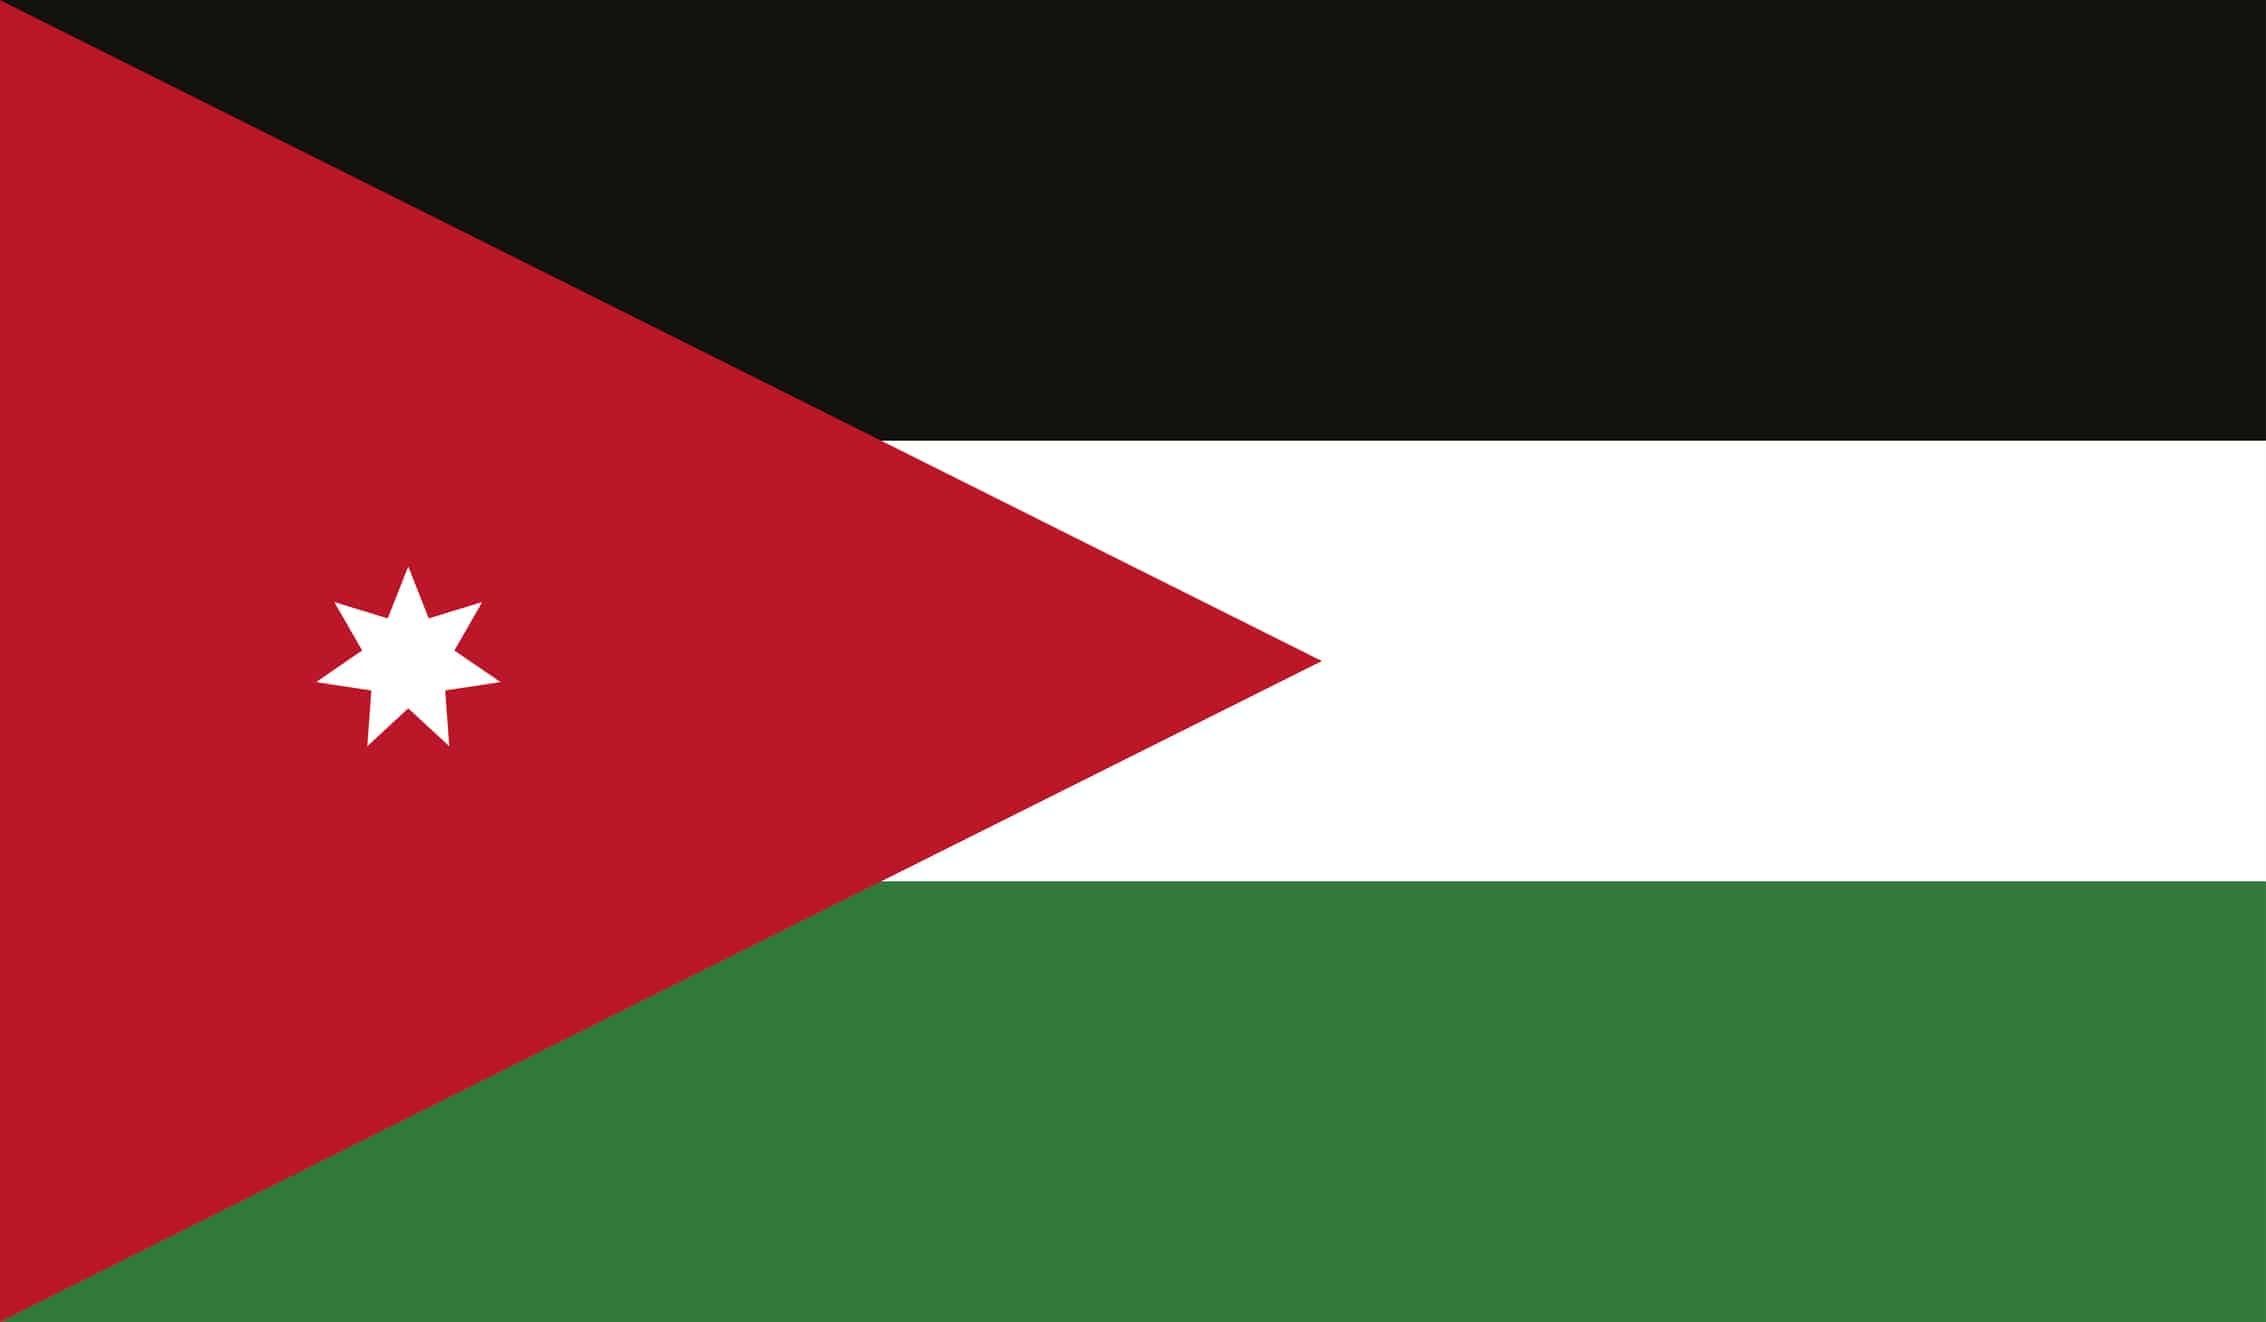 The Flag of Jordan: History, Meaning 